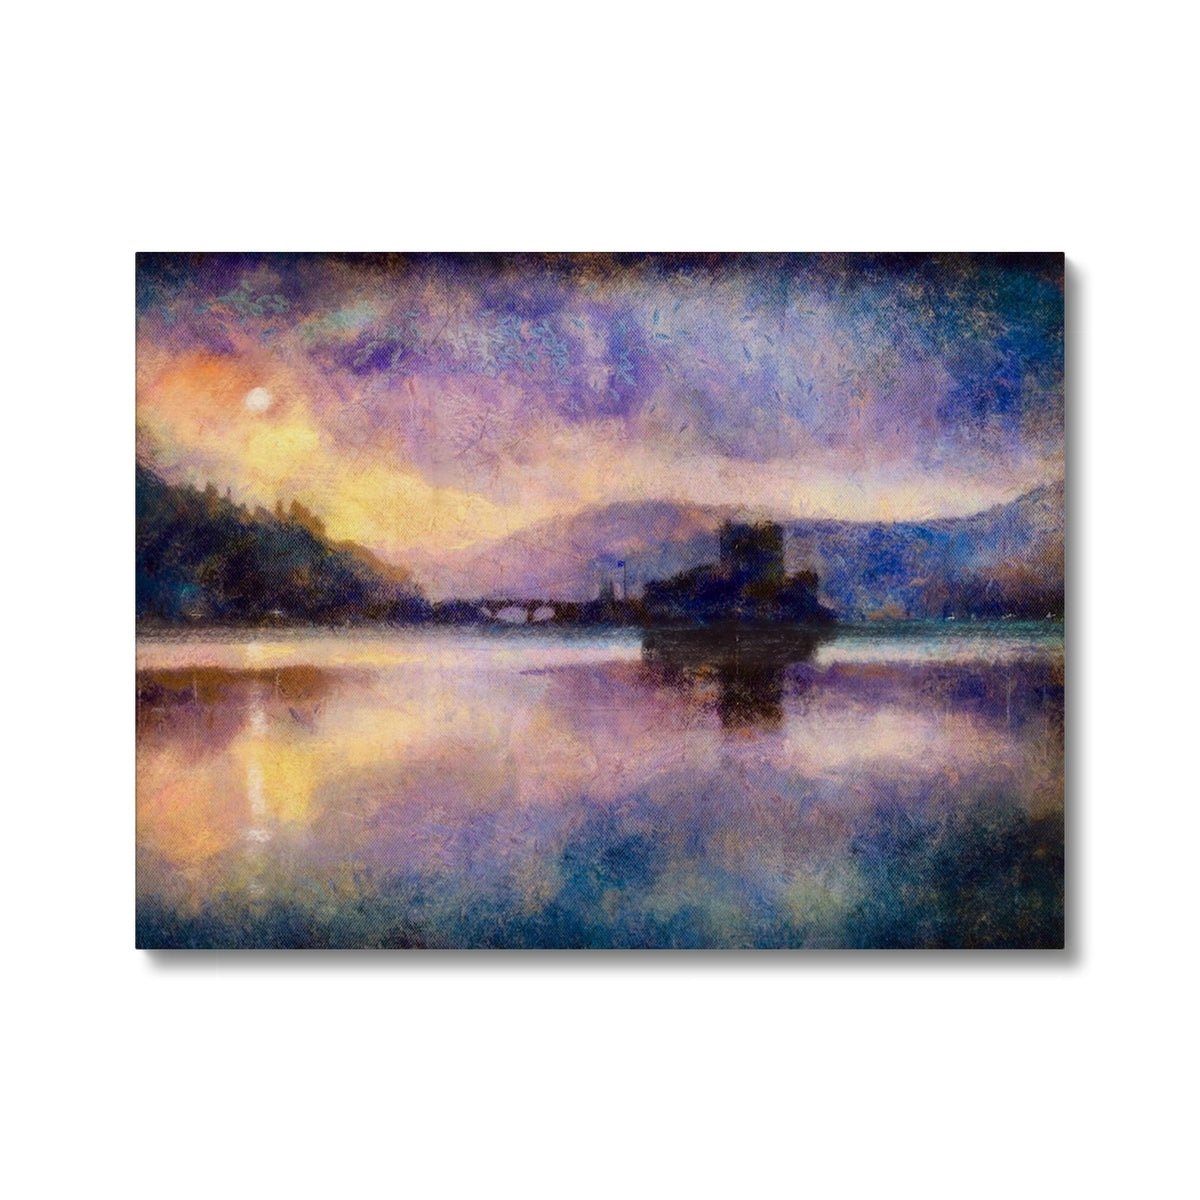 Eilean Donan Castle Moonlight Painting | Canvas From Scotland-Contemporary Stretched Canvas Prints-Historic & Iconic Scotland Art Gallery-24"x18"-Paintings, Prints, Homeware, Art Gifts From Scotland By Scottish Artist Kevin Hunter